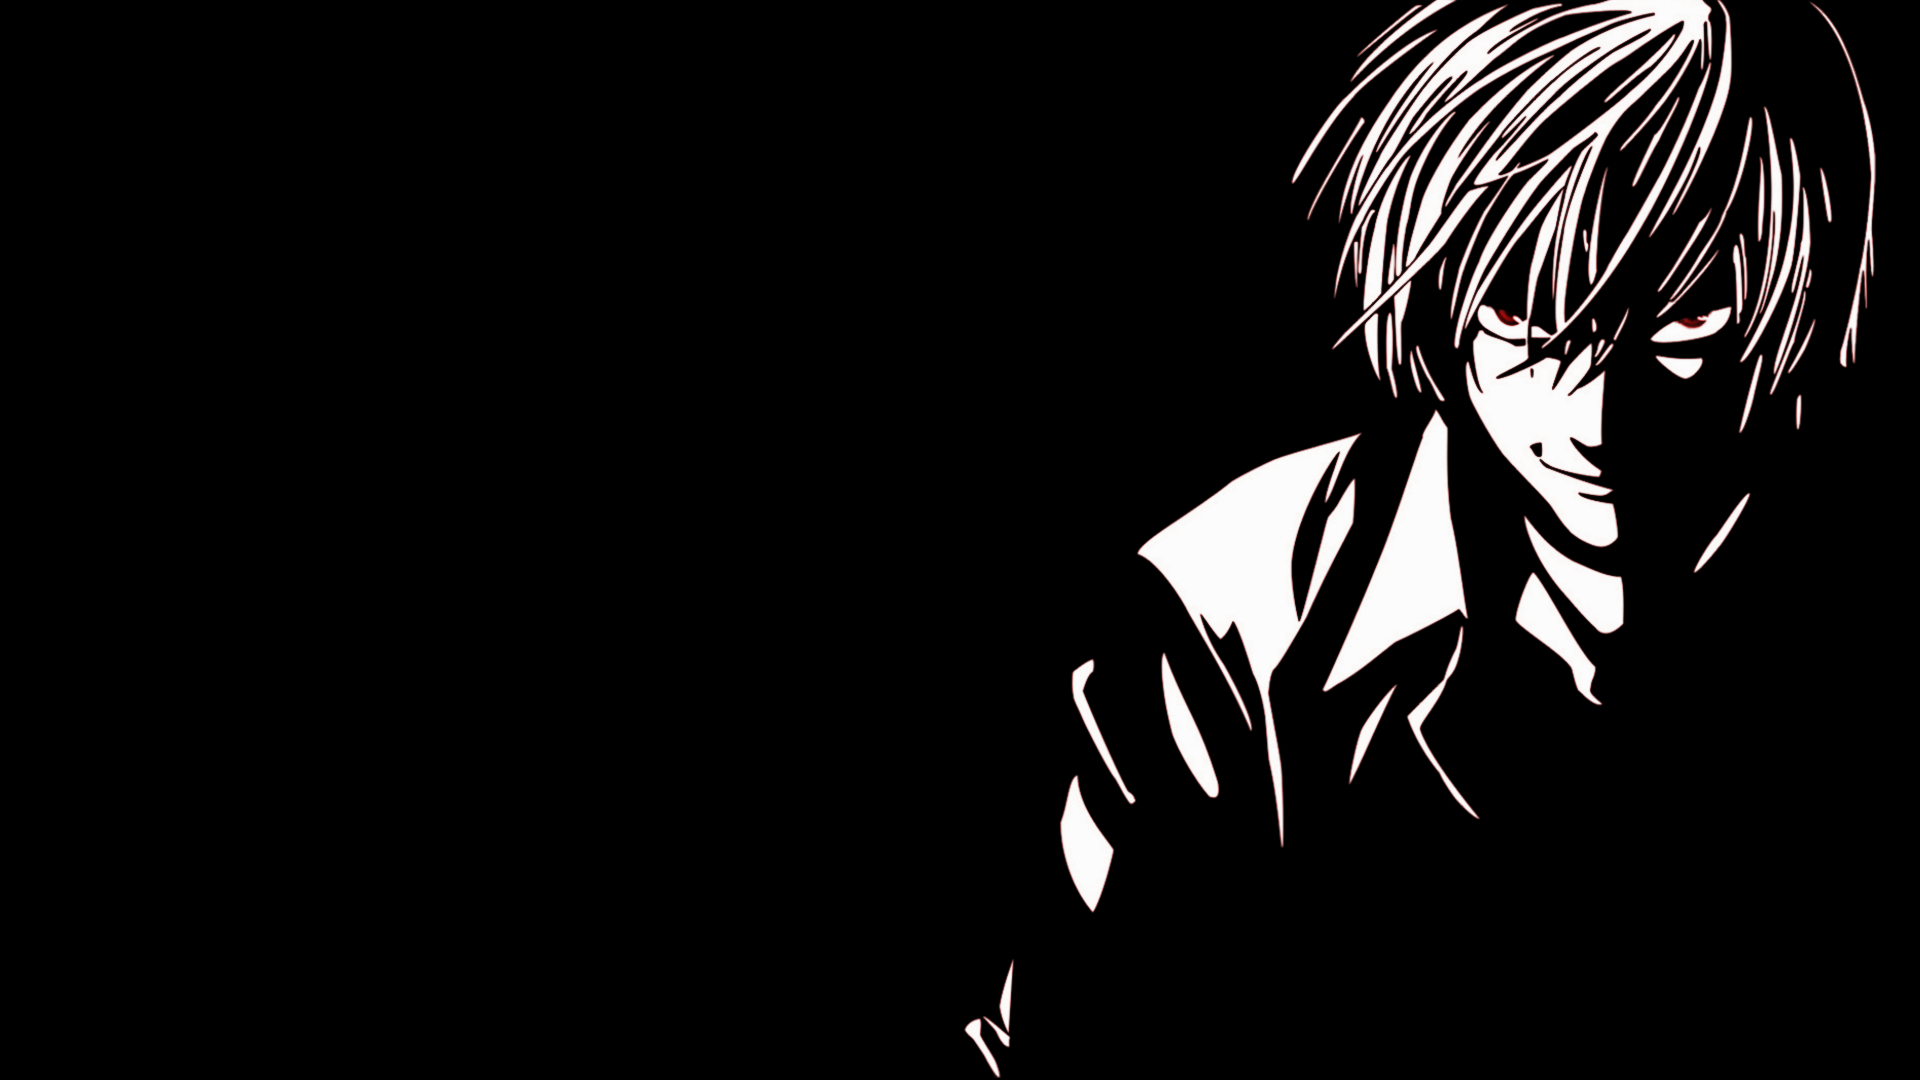 Anime Wallpaper Hd Death Note - TeknoGrapic